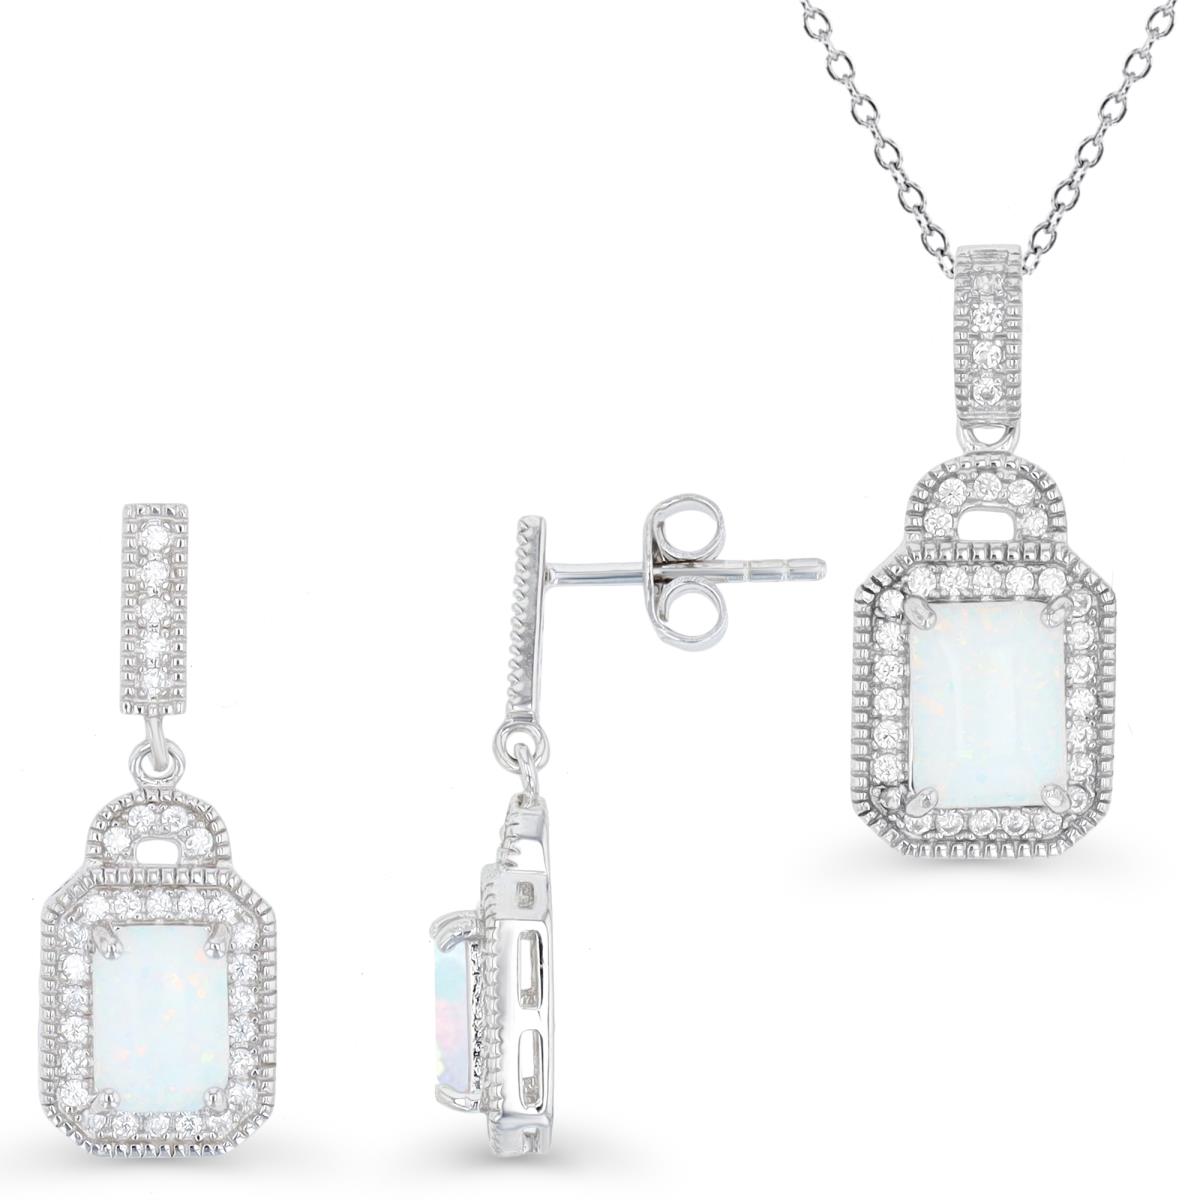 Sterling Silver Rhodium & CU Ct. Cr. White Opal and Cr. White Sapphire Halo Drop Earrings and Necklace Set